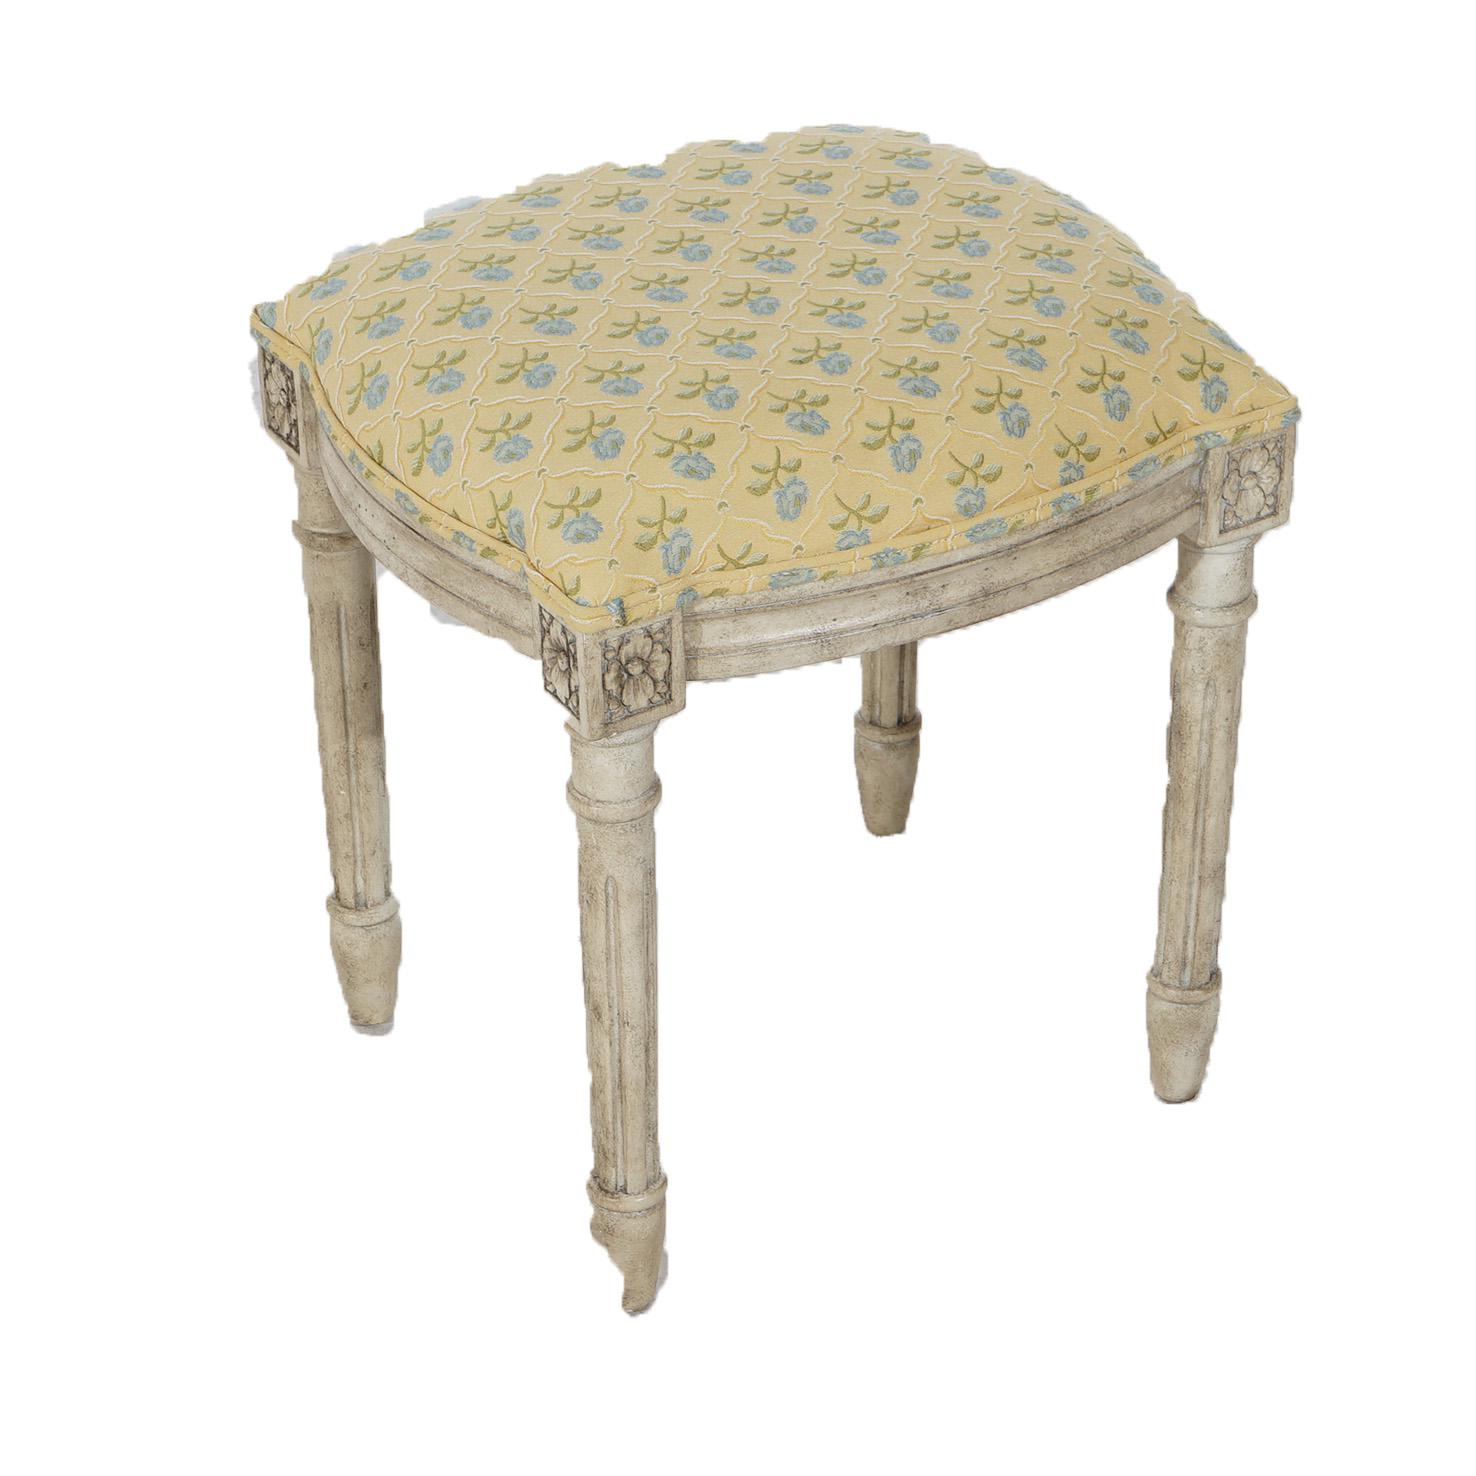 French Louis XVI Style Upholstered Vanity Stool with Rosettes & Tapered Reeded Legs, 20thC

Measures- 19''H x 17''W x 17''D